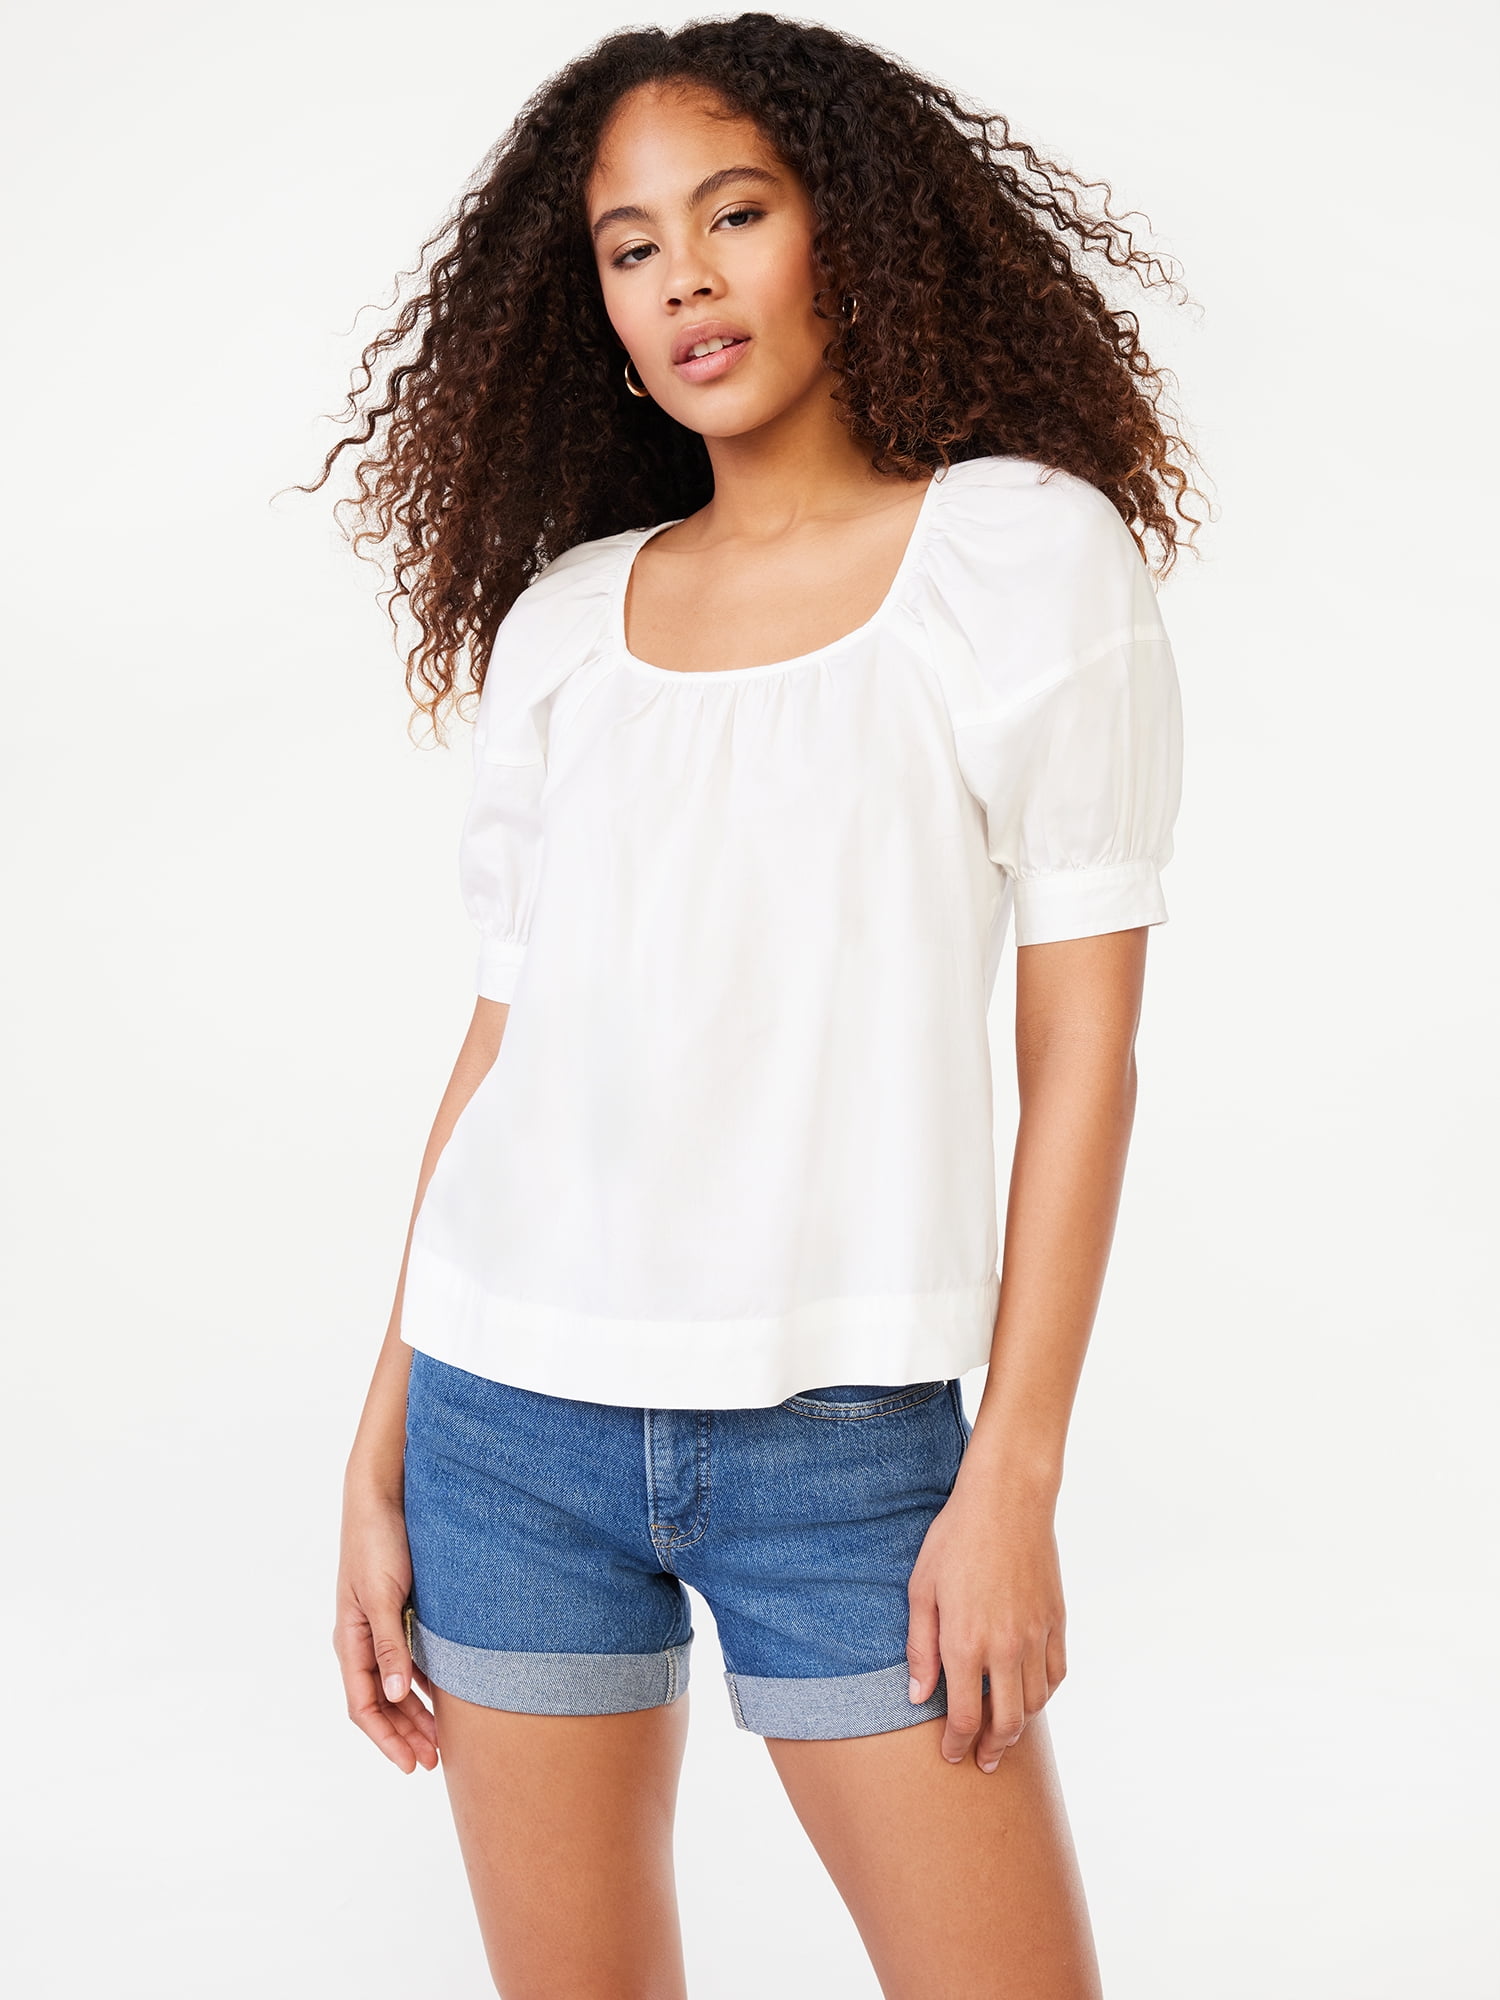 Free Assembly Women's Square Neck Top with Short Puff Sleeves, Sizes XS ...